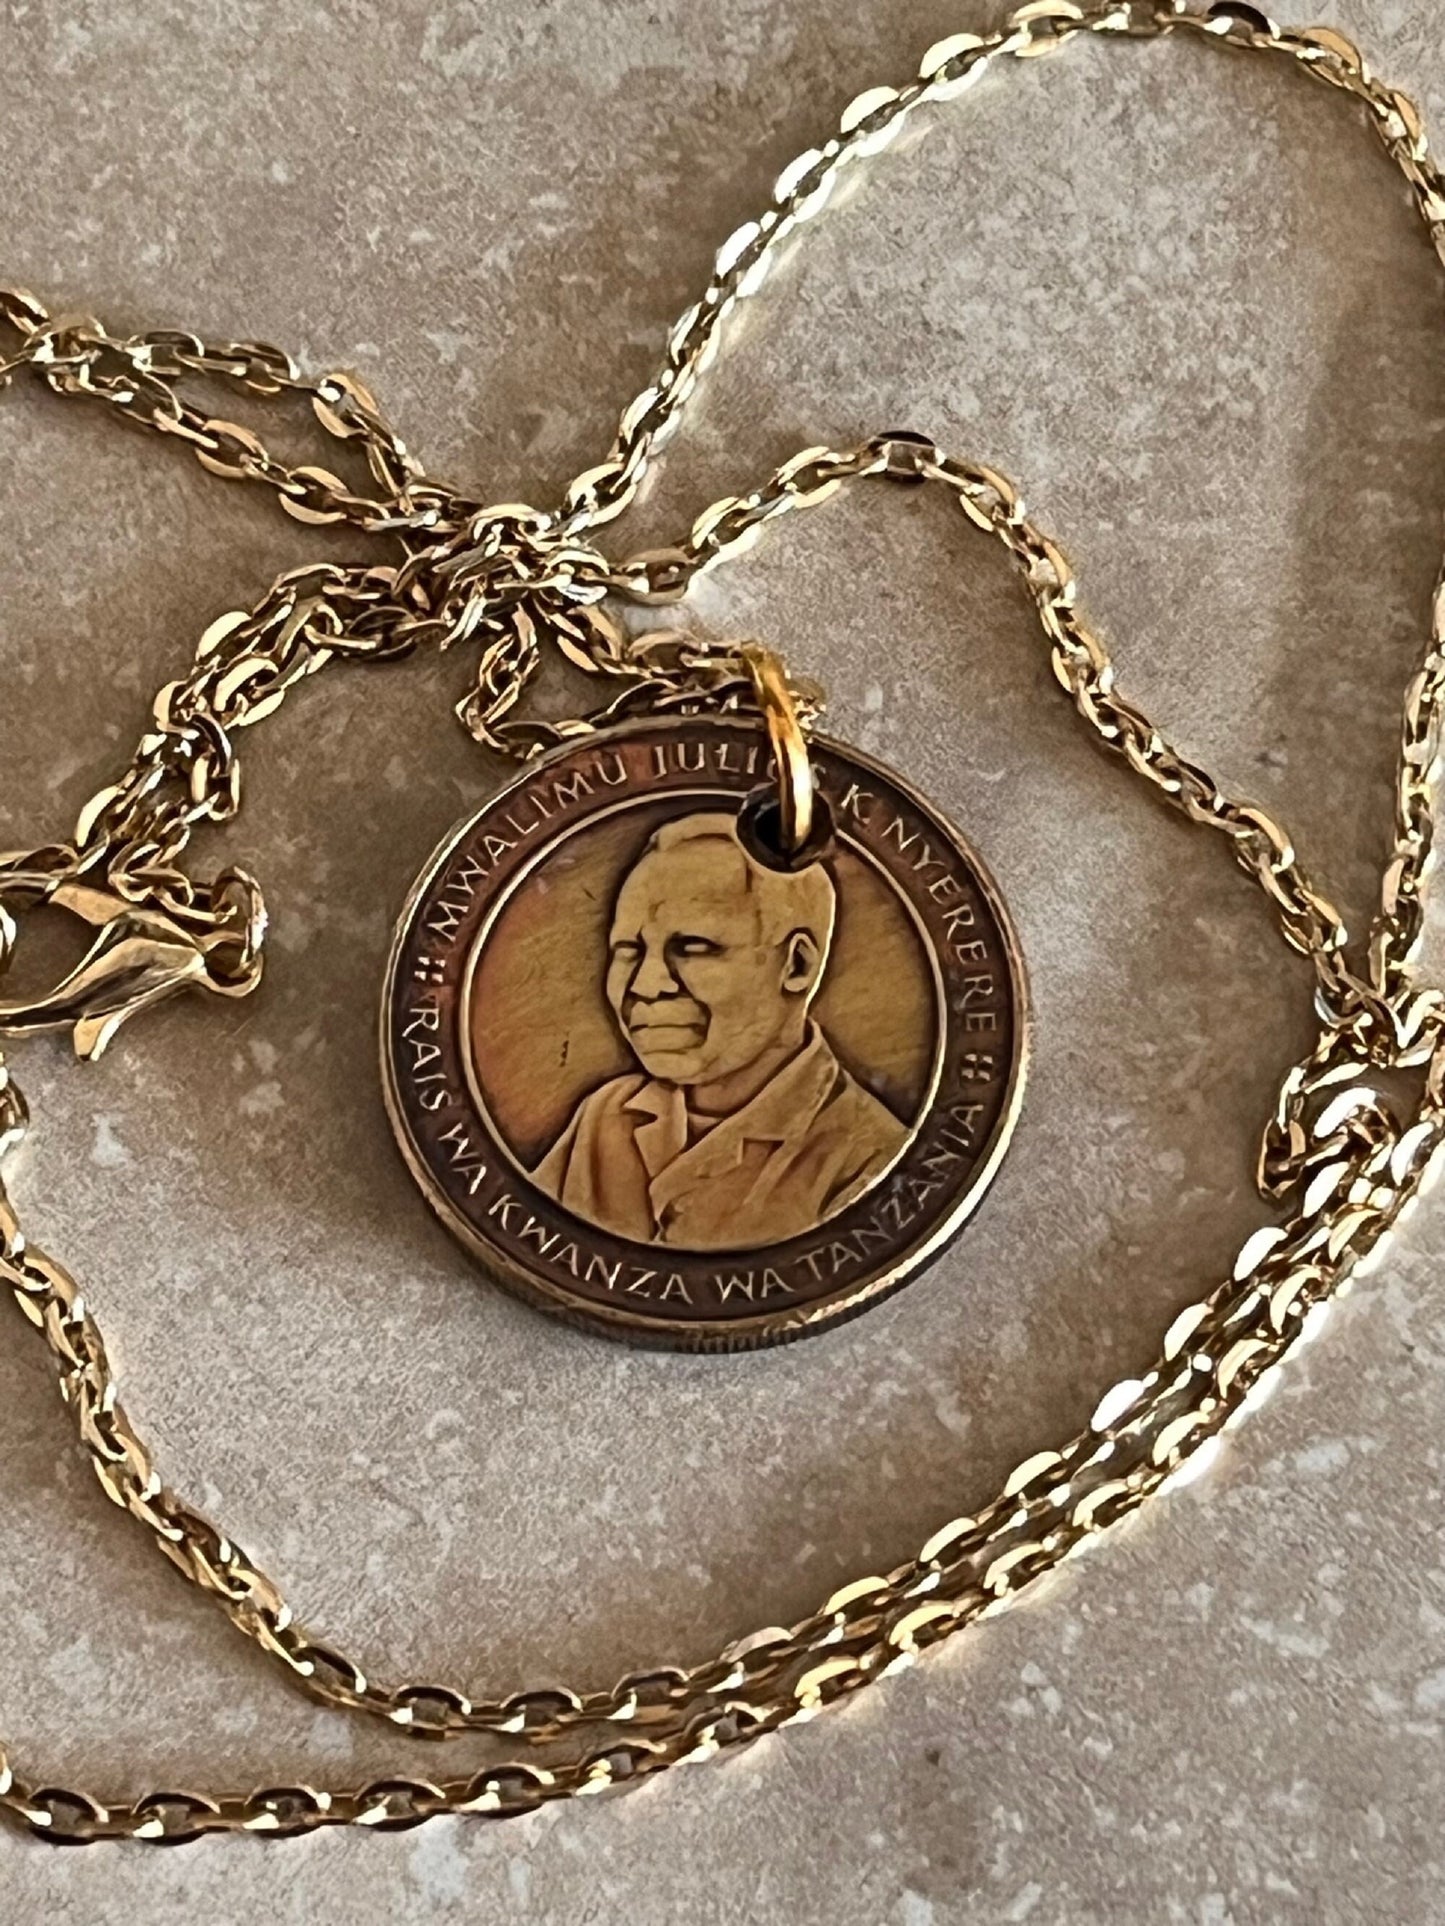 Tanzania Coin Necklace 100 Shilling Africa Pendant Personal Old Vintage Handmade Jewelry Gift Friend Charm For Him Her World Coin Collector